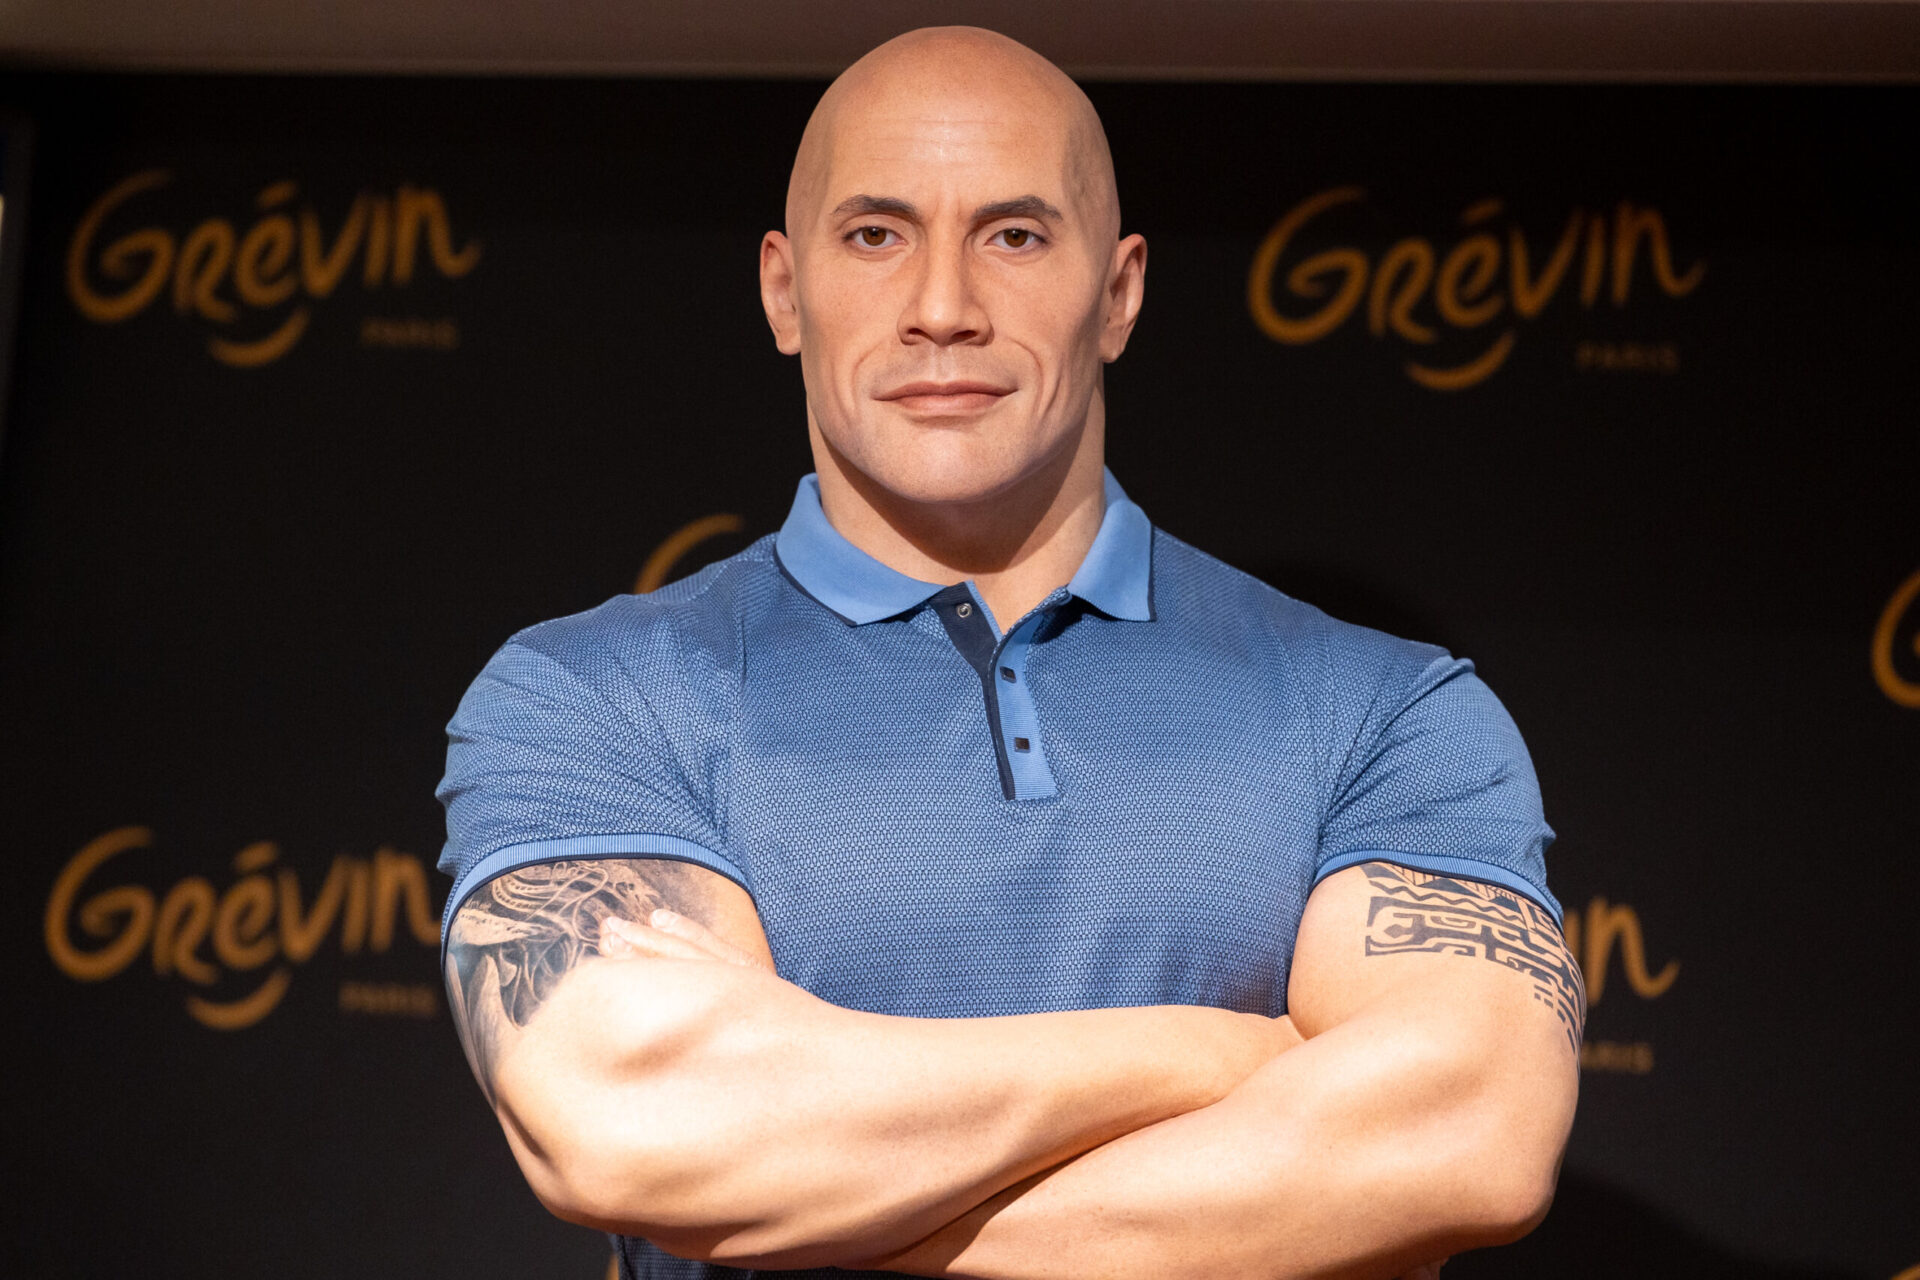 Dwayne Johnson wax figure is unveiled at Musee Grevin, the Rock